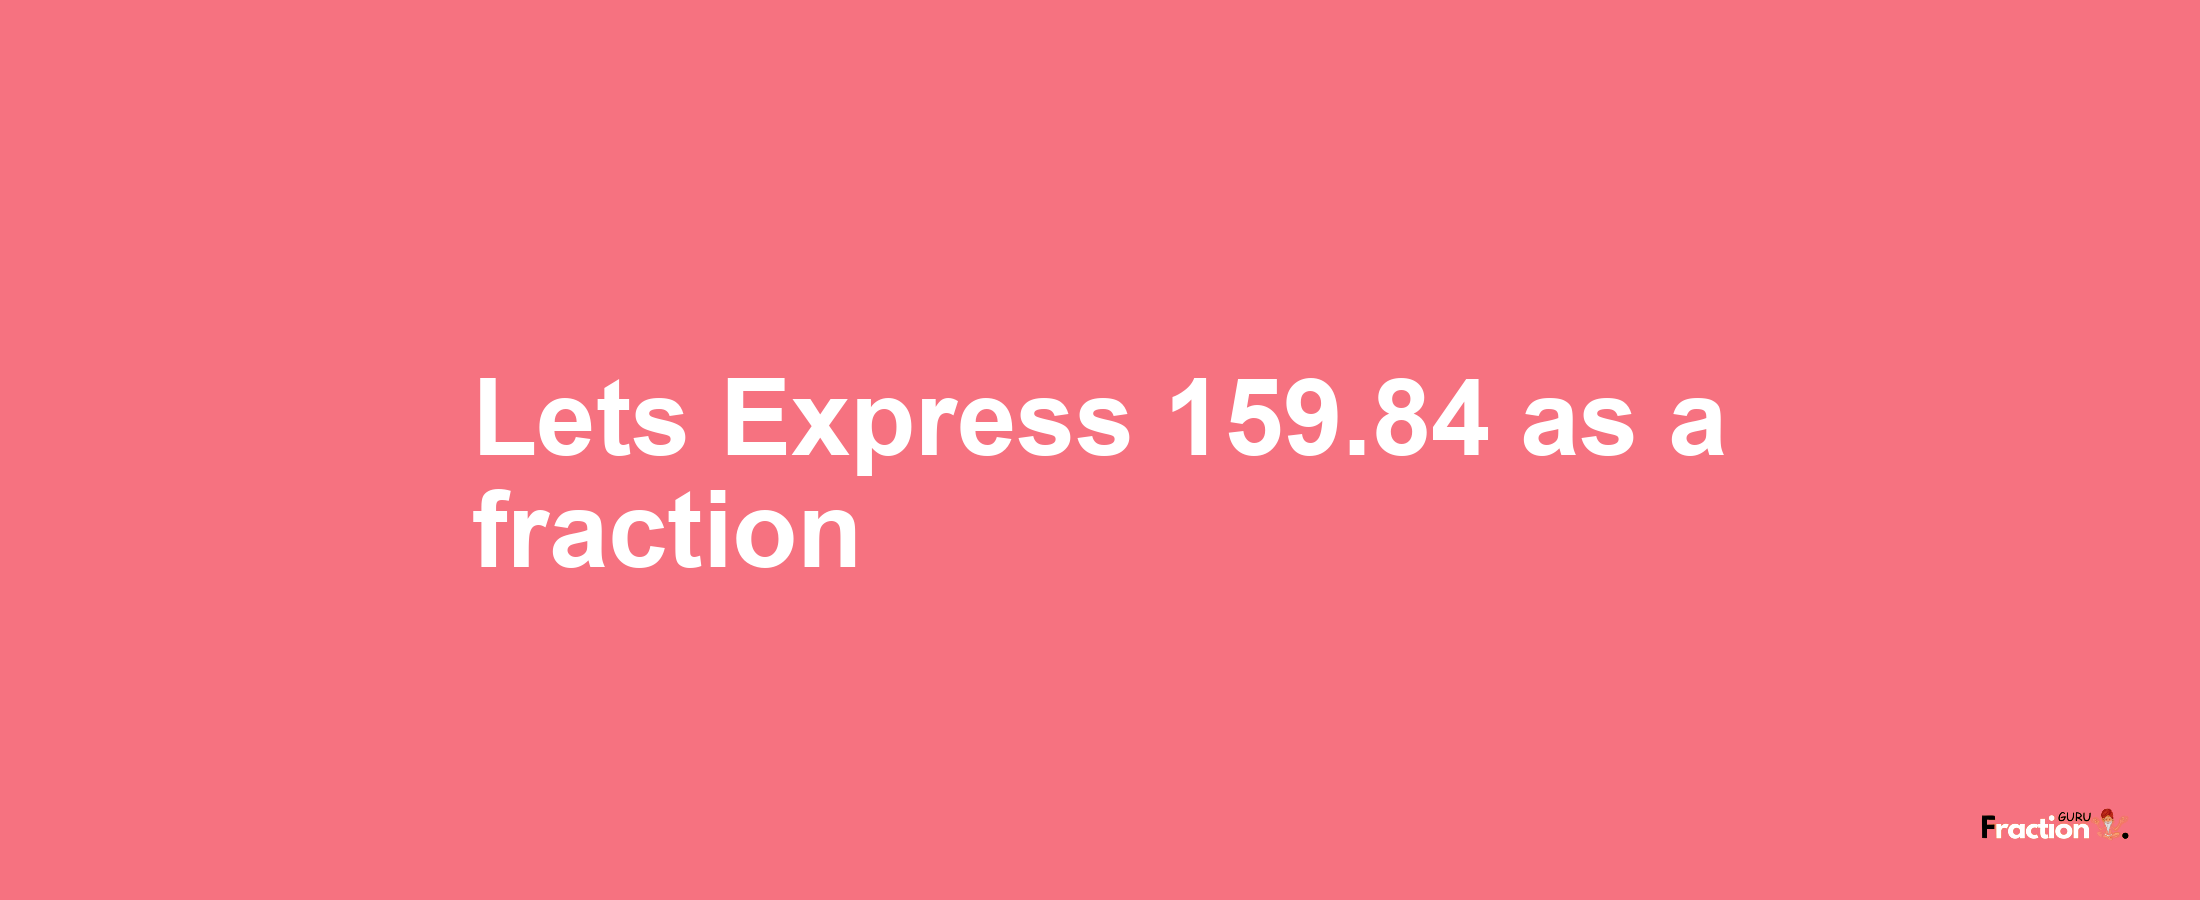 Lets Express 159.84 as afraction